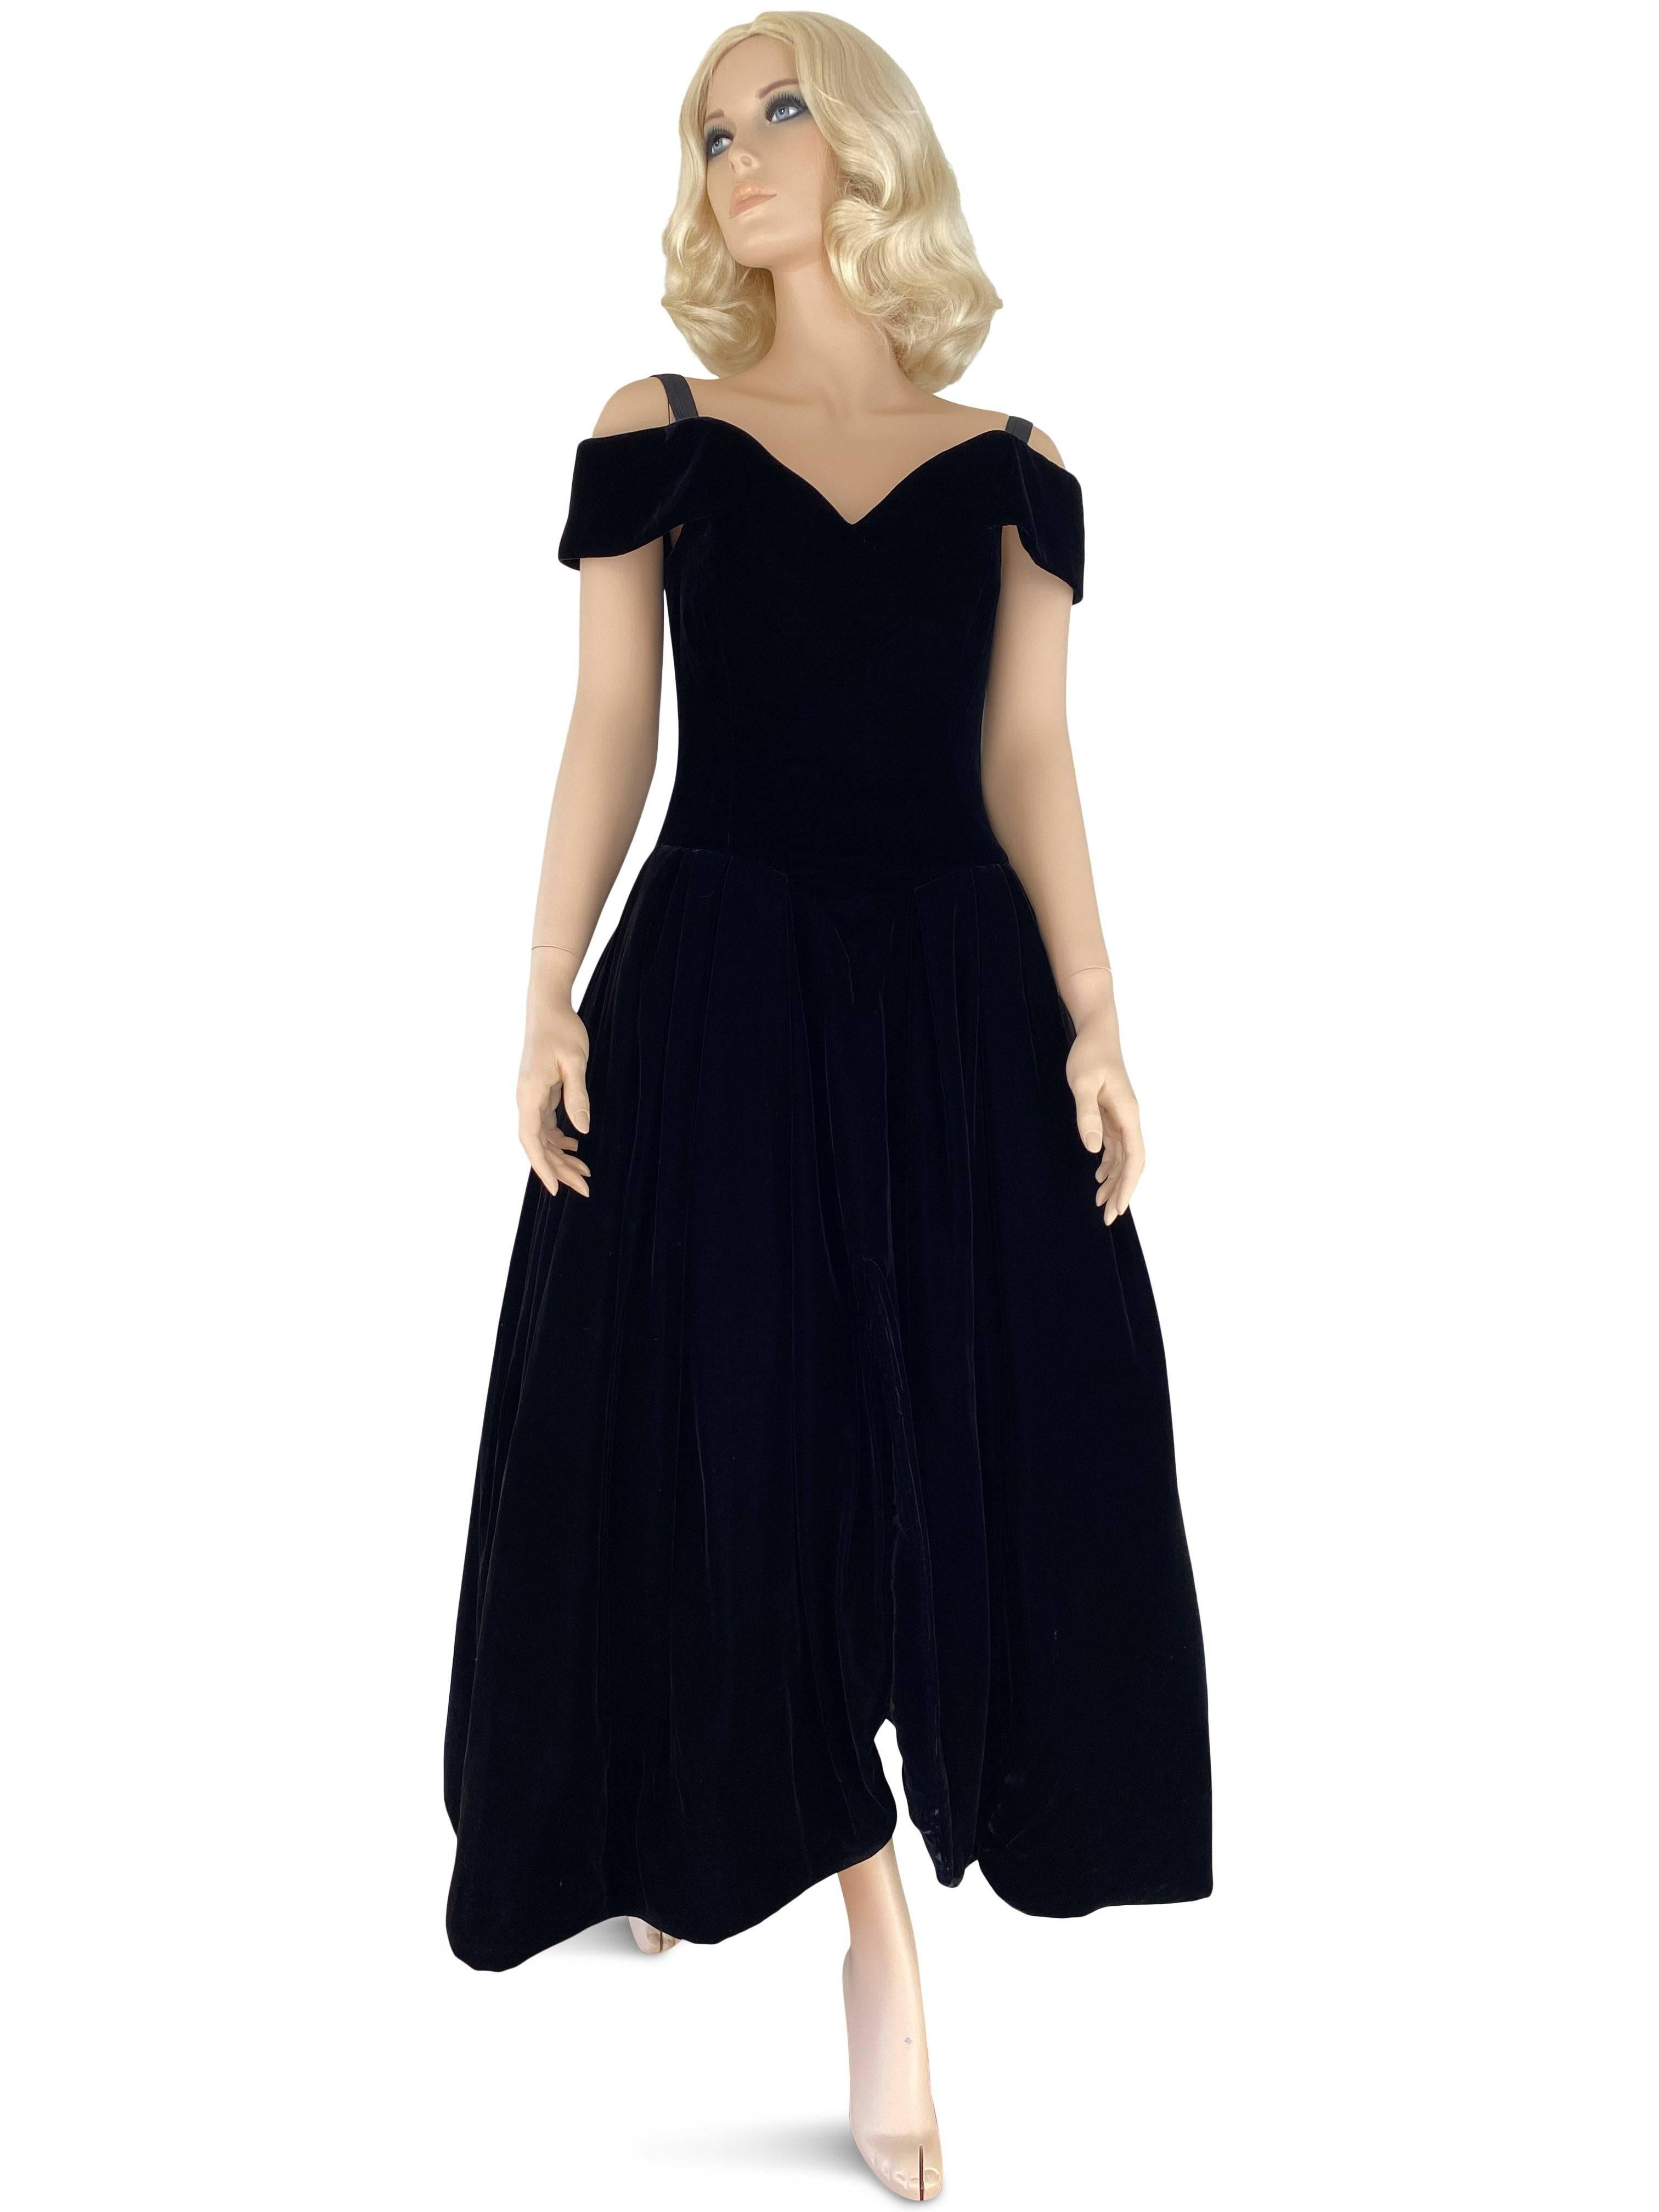 This is a dream of a dress, classically elegant with timeless style. Designed by famed couture designer Arnold Scaasi, who dressed many First Ladies as well as Oscar Awards ensembles for celebrities such as Barbara Streisand for her Funny Lady win!